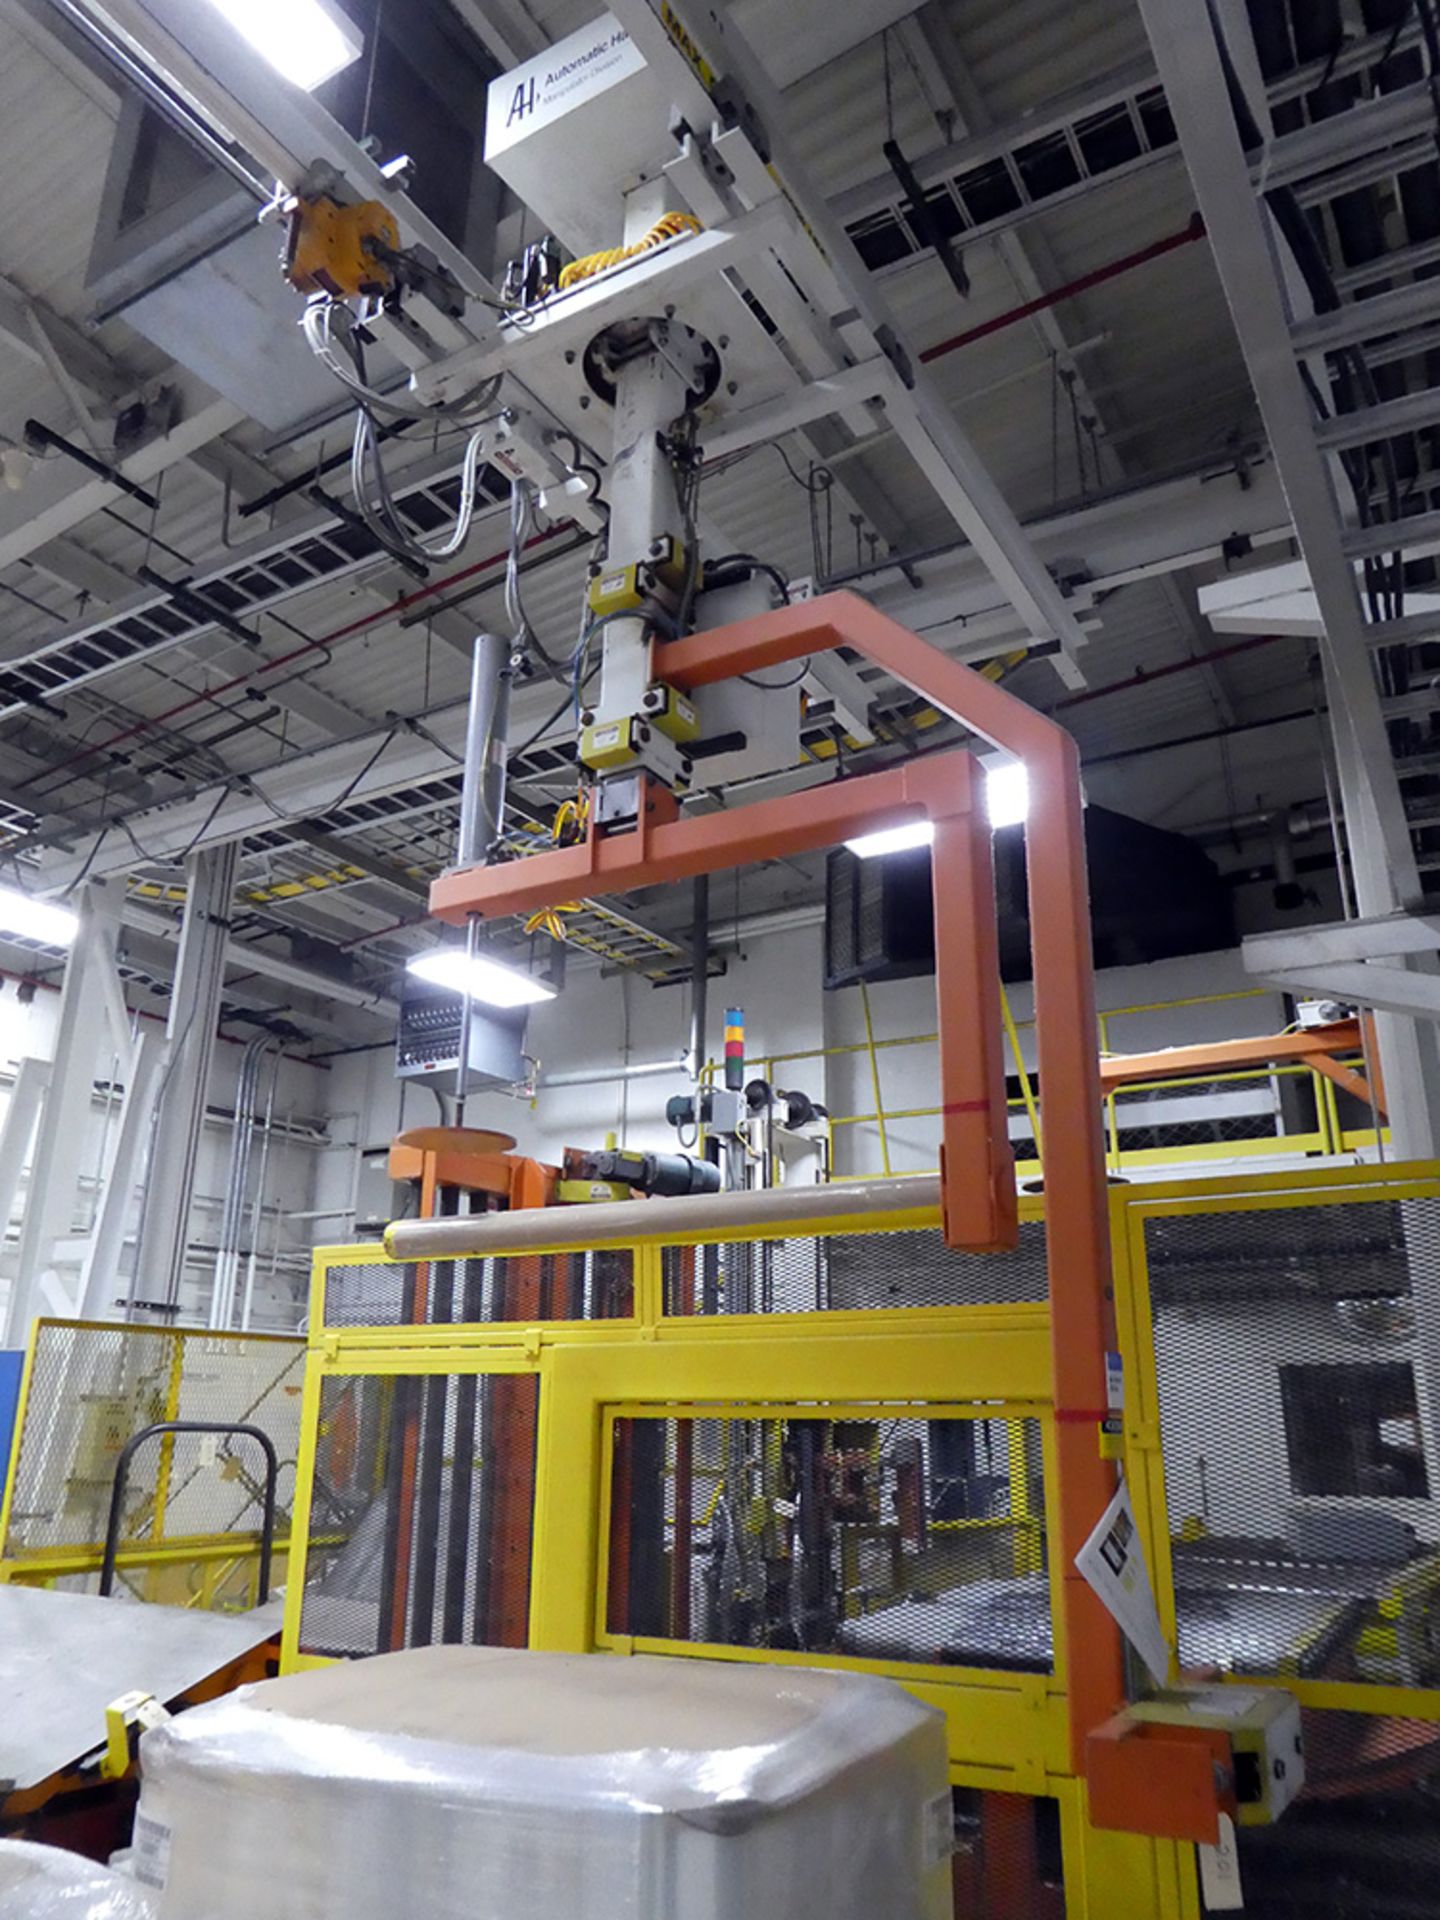 Automatic Handling X-Y-Z C-Hook Roll Handling System - Image 2 of 6